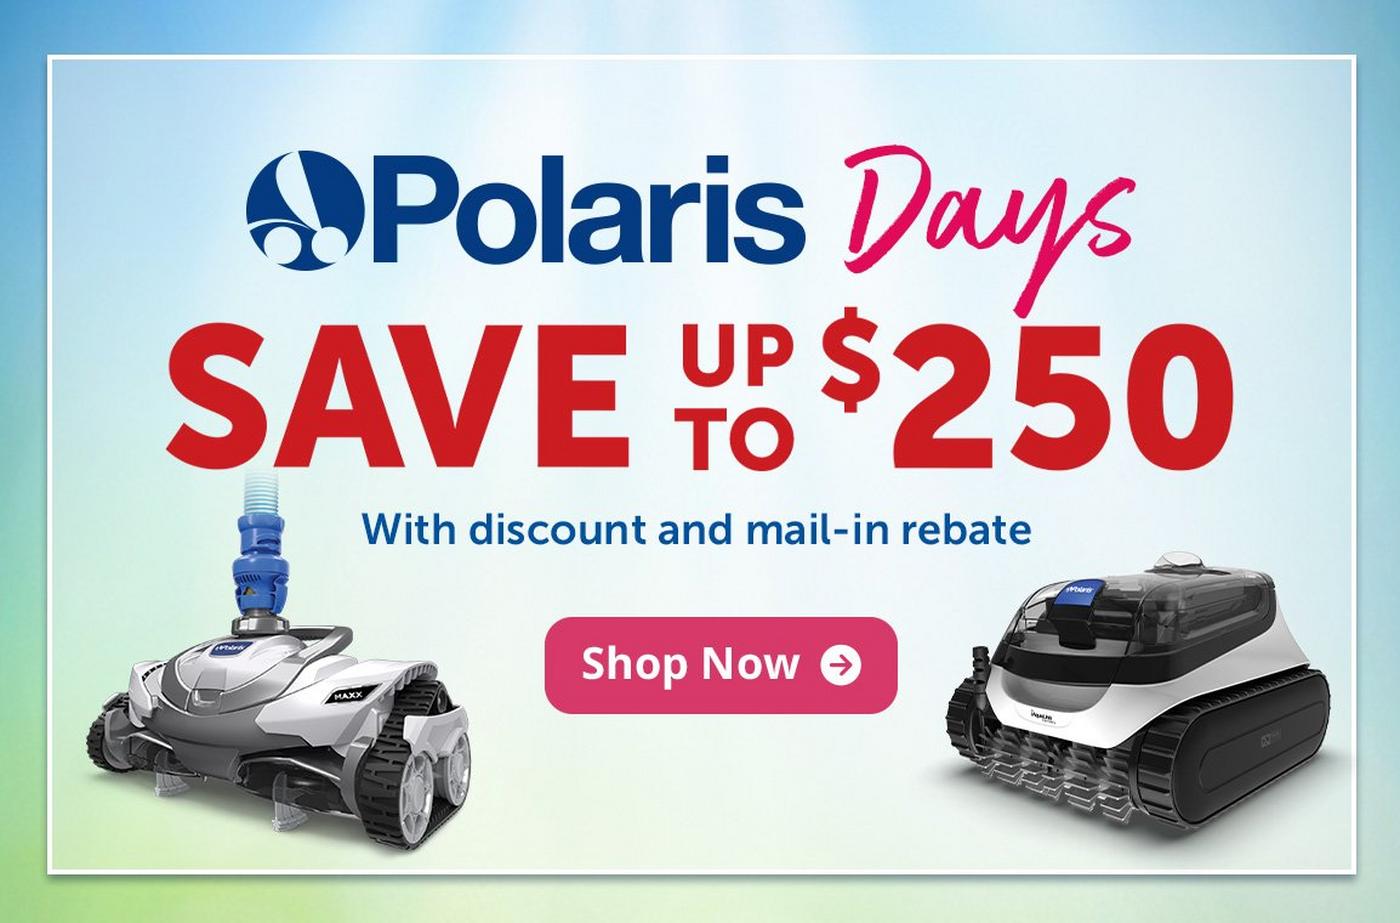 Polaris Days - save $150 or more on select automatic pool cleaners